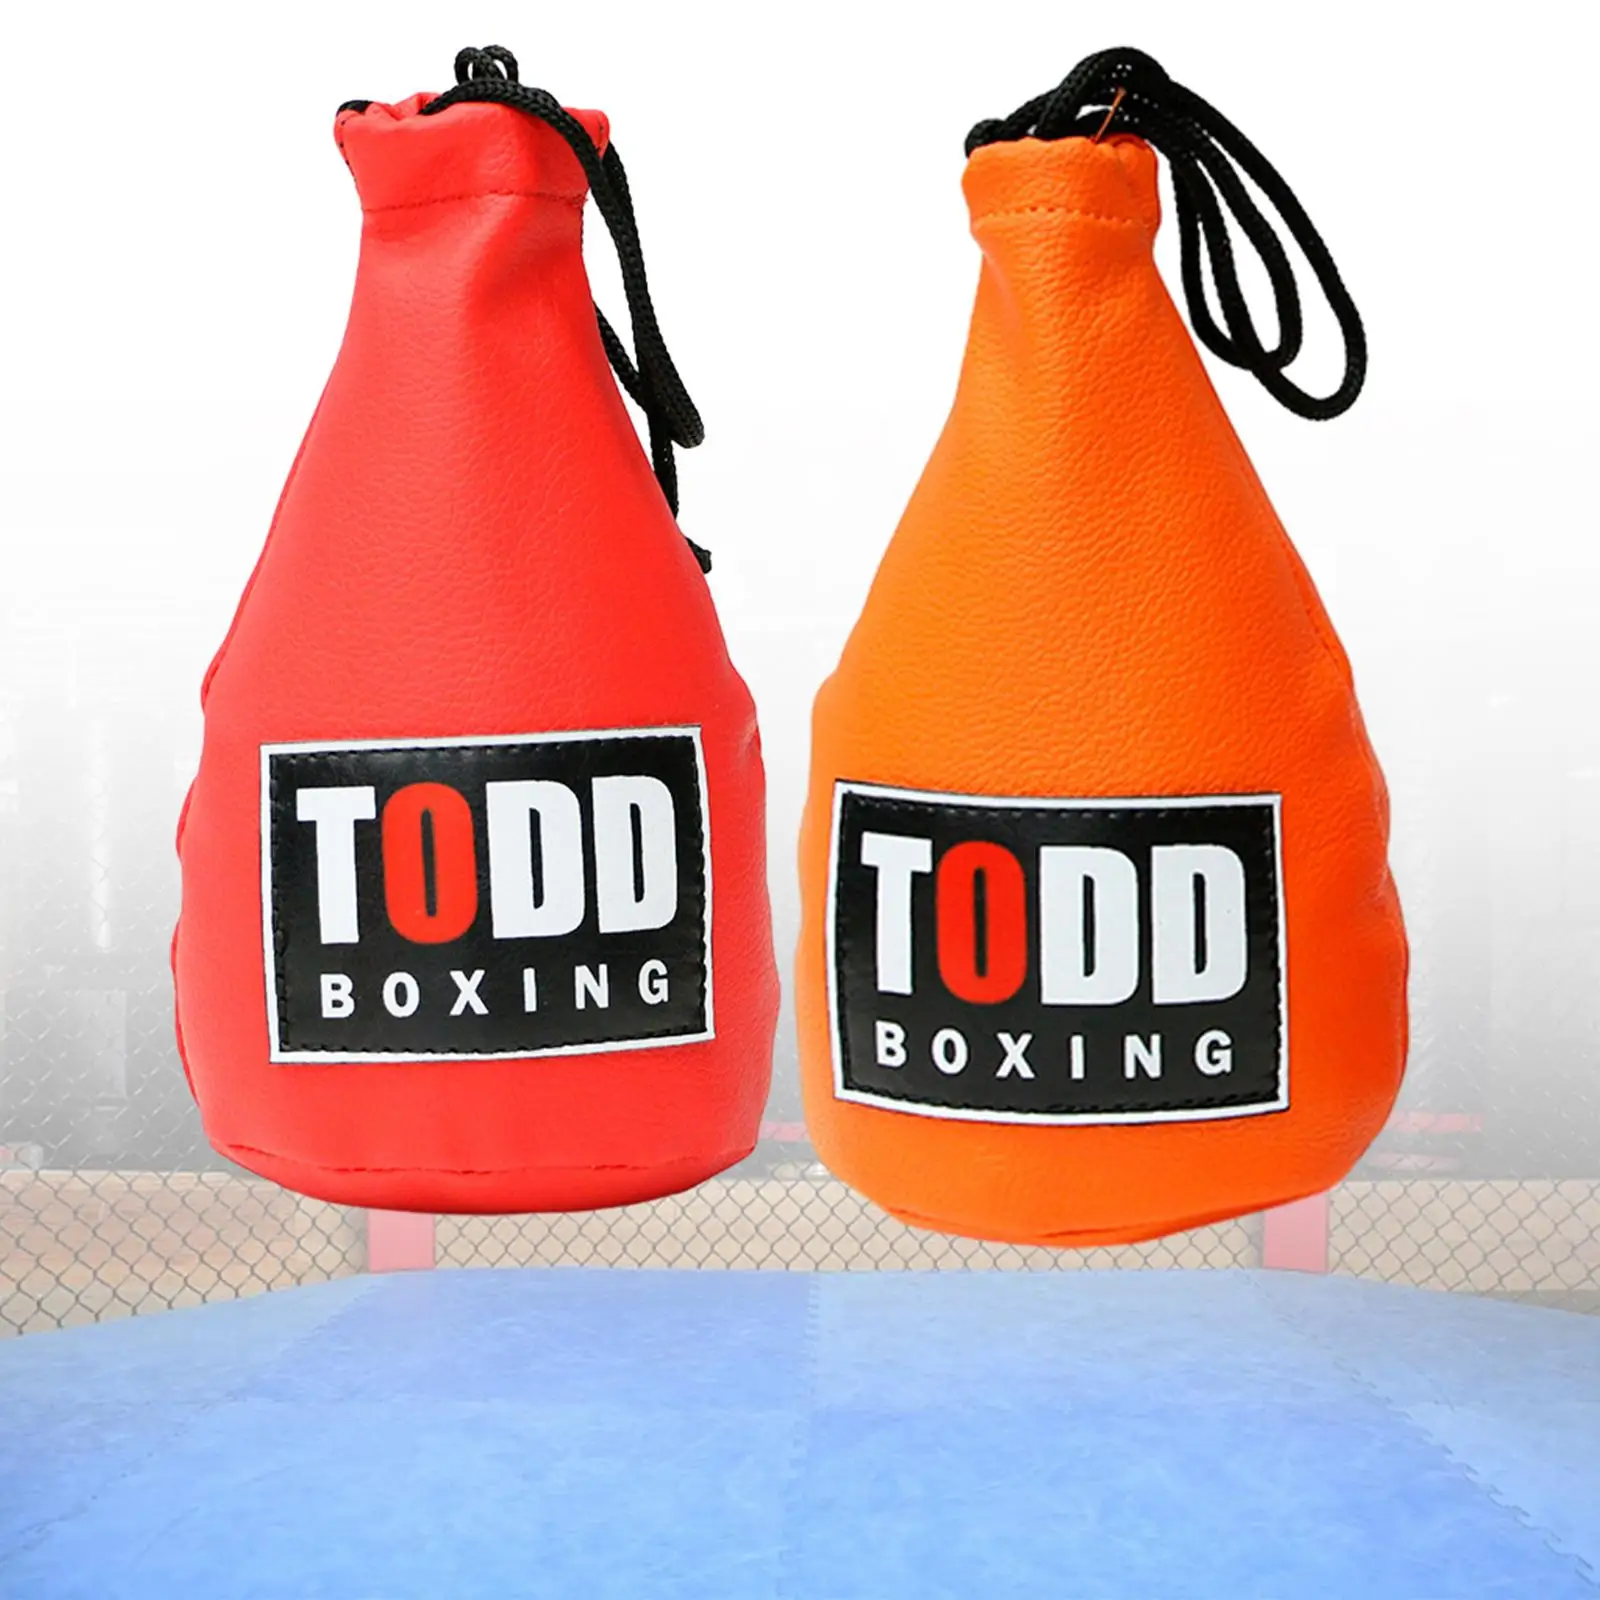 Boxing Dodge Training Bag Gear Adults Boxing Punch Bag for Fight Skill Punching